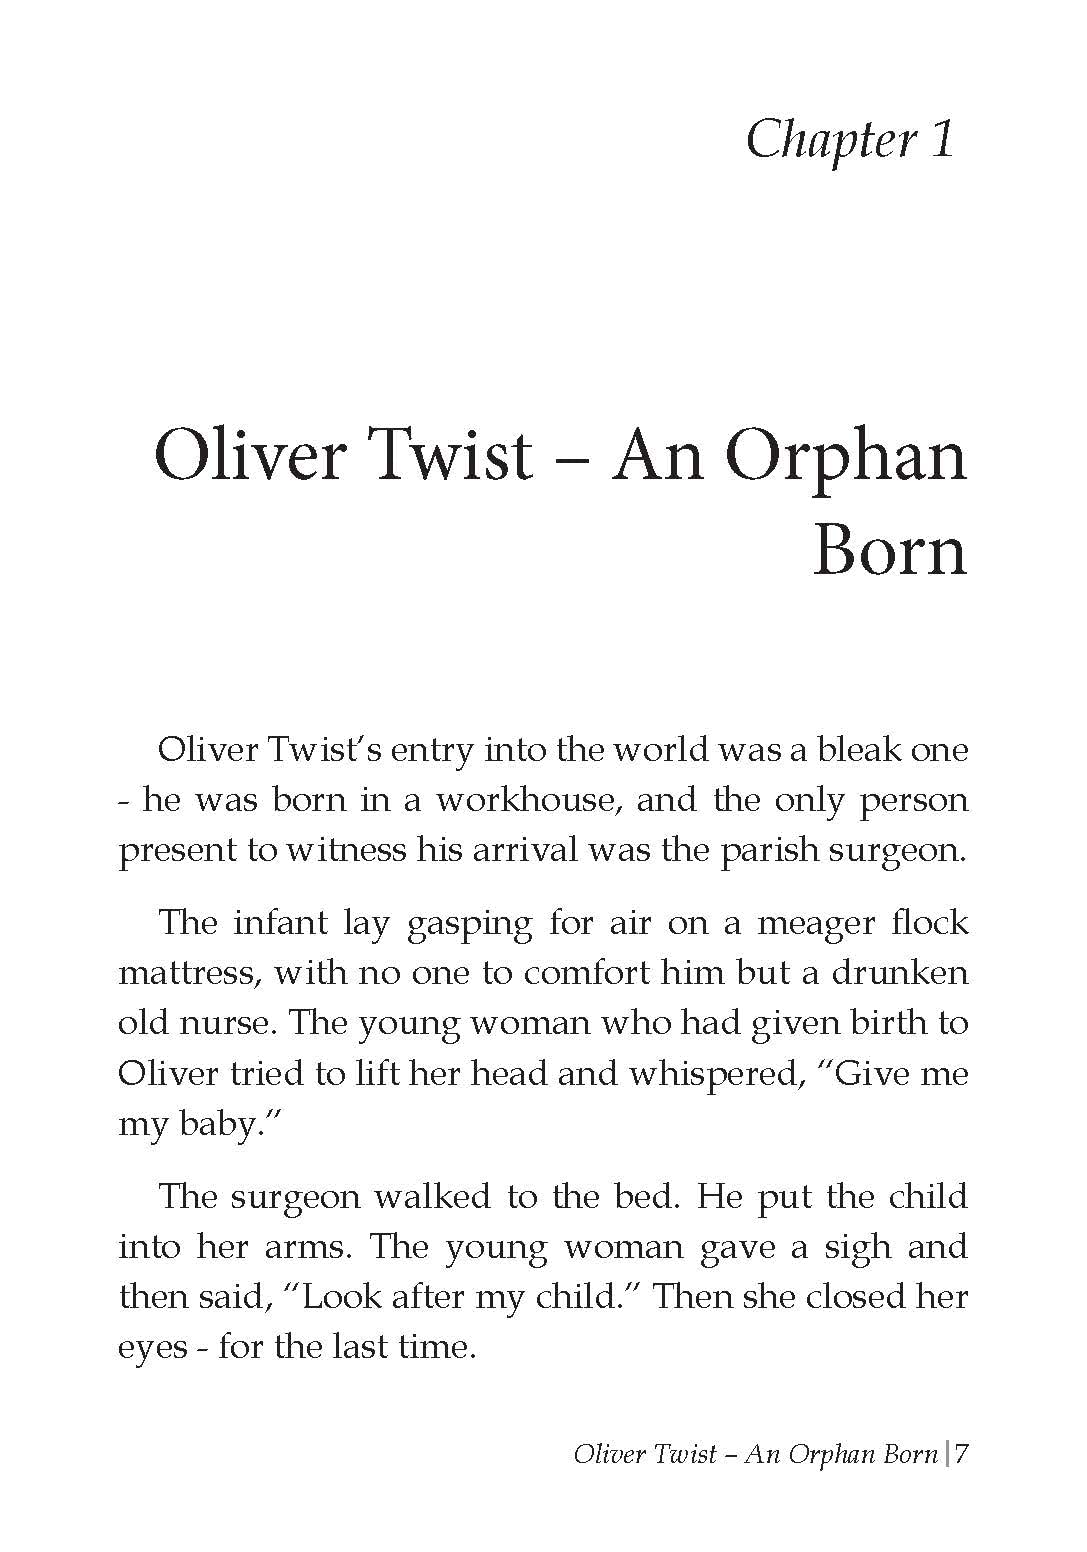 Dreamland Classic Tales Oliver Twist - llustrated Abridged Classics for Children with Practice Questions